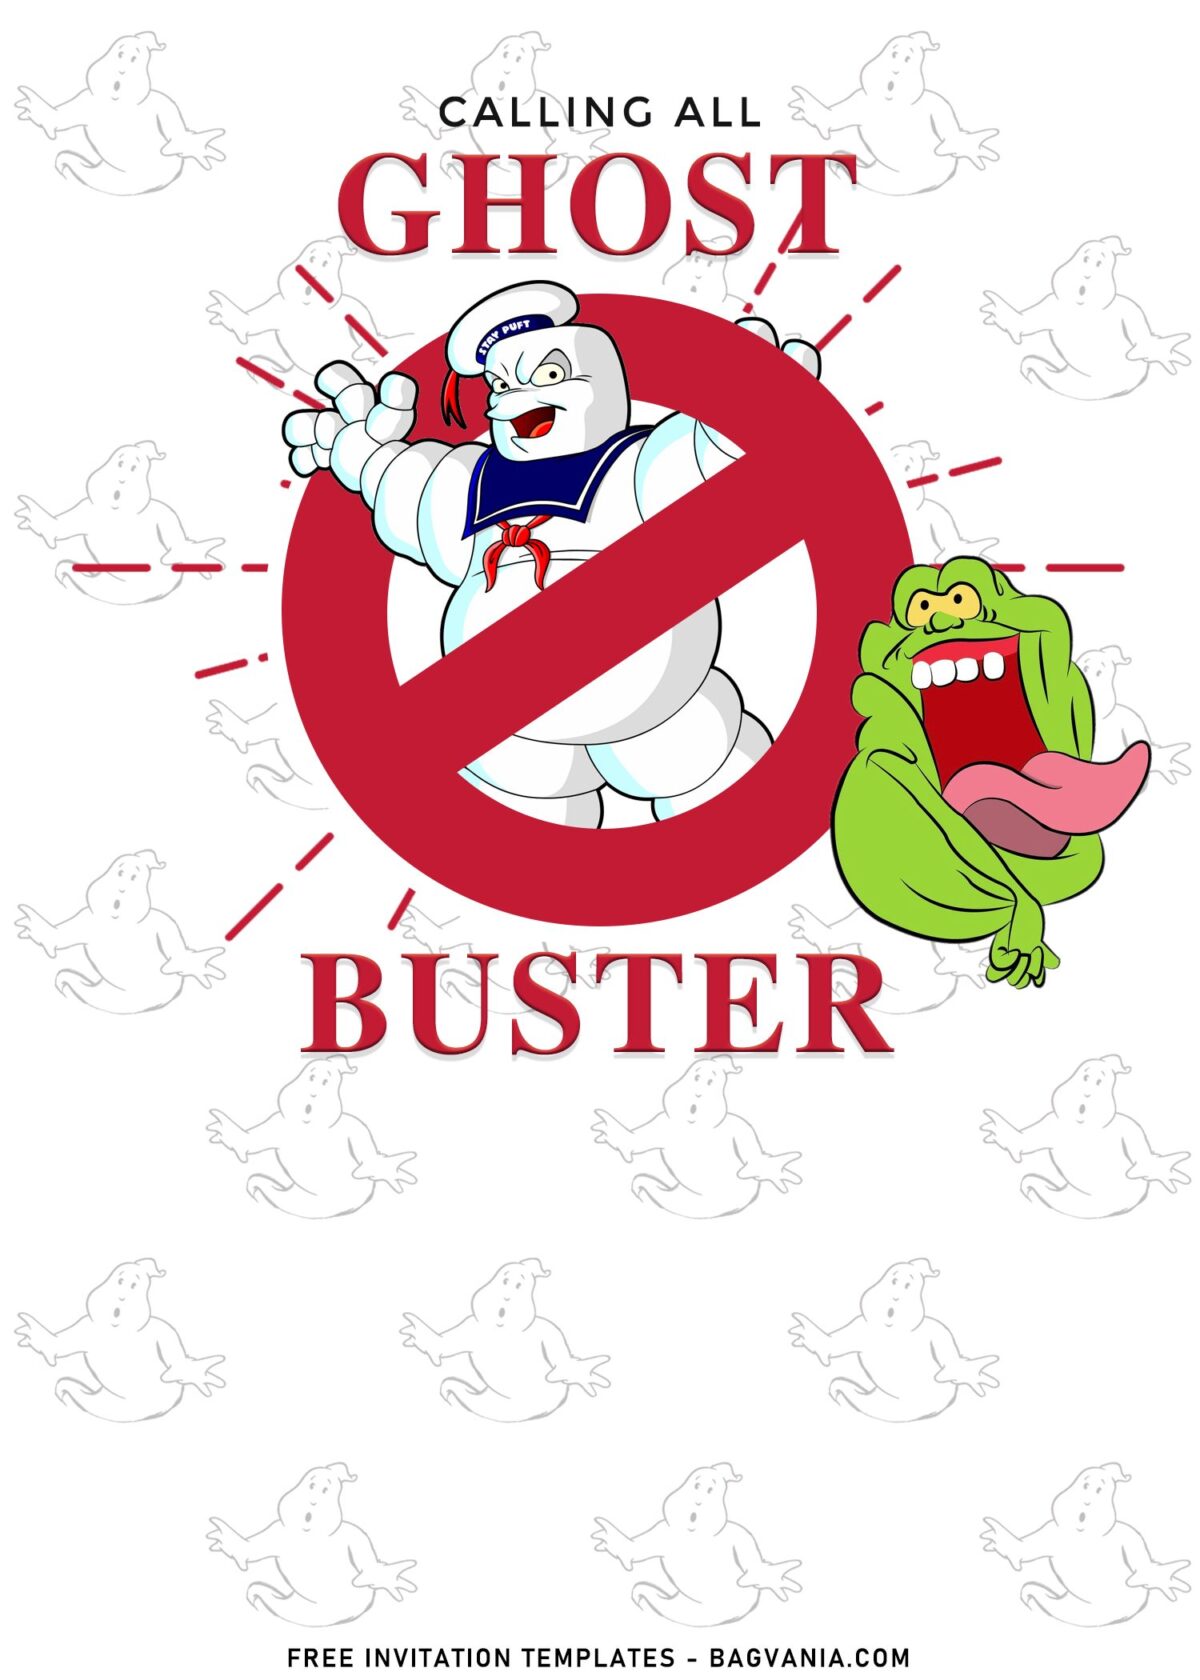 11+ Boys Ghostbuster Afterlife Birthday Invitation Templates with Slimer ghost